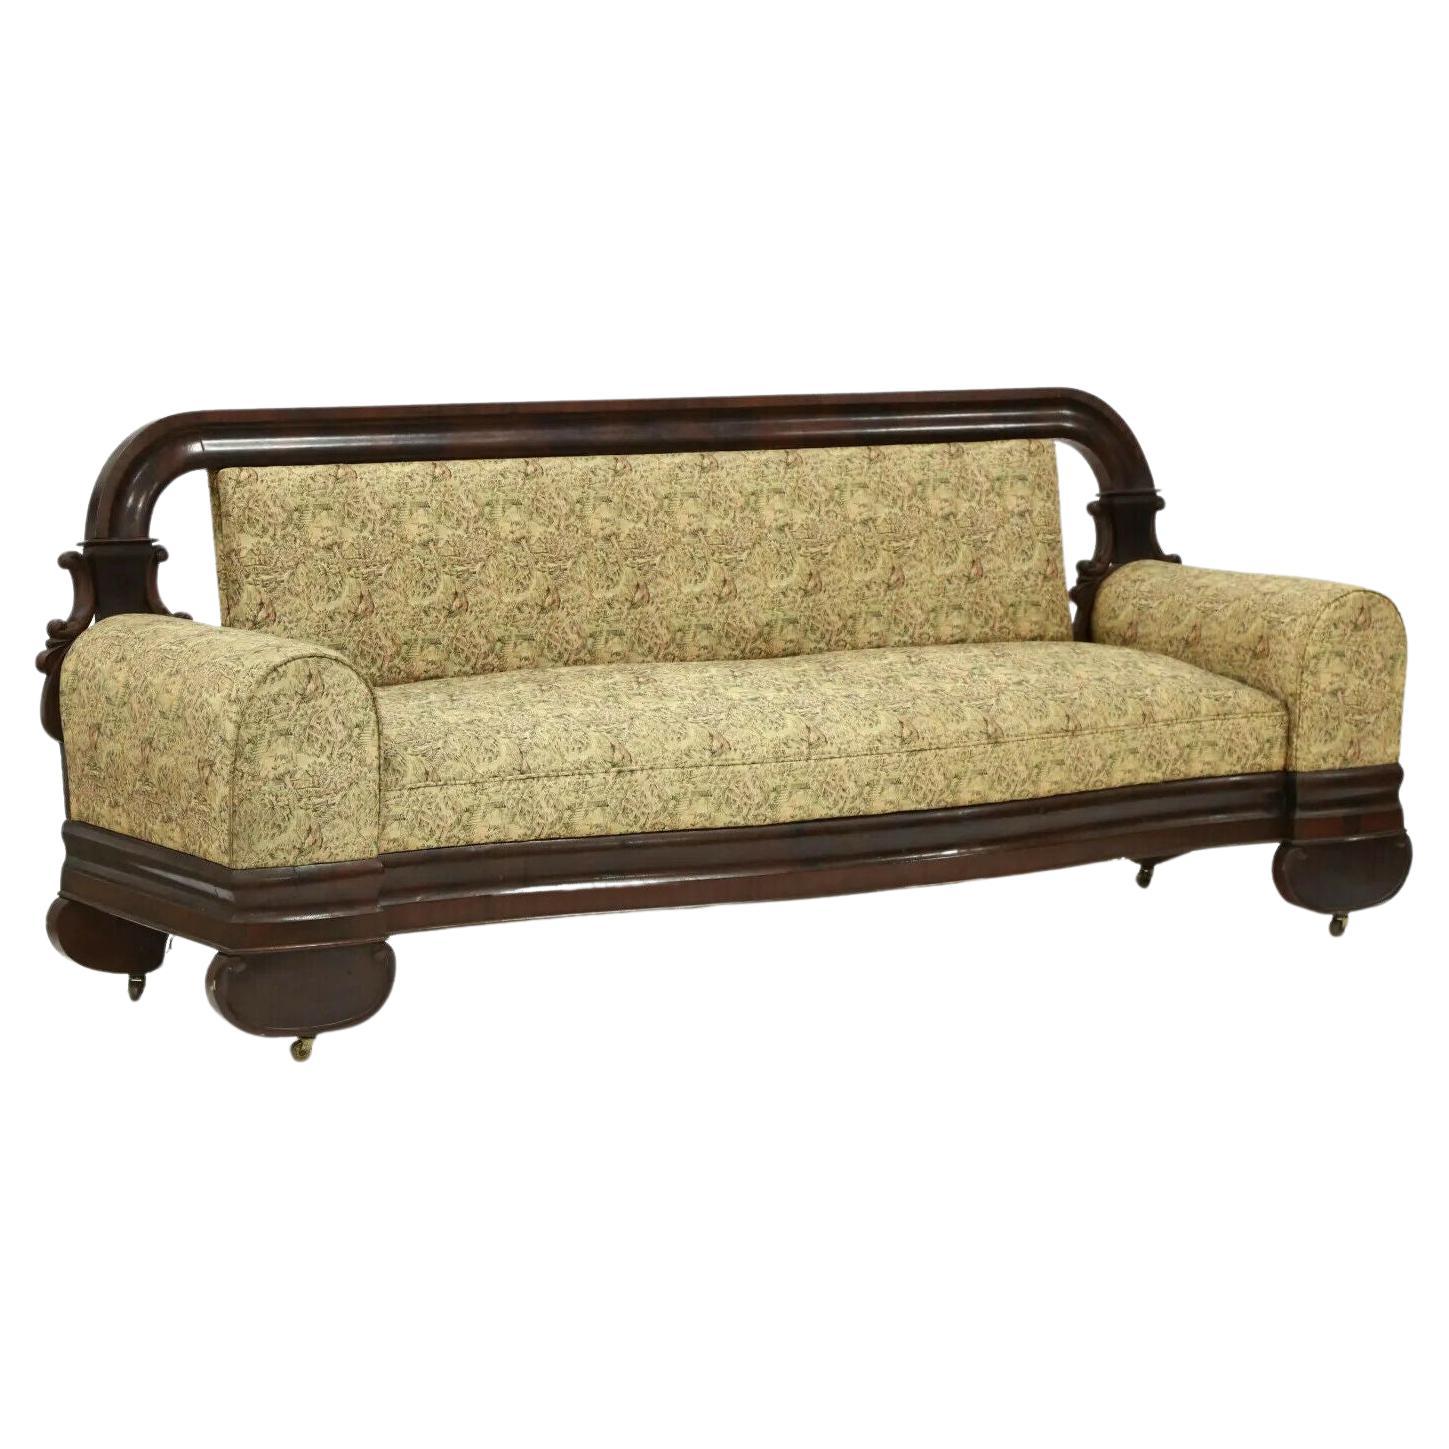 C. 1840's Antique American Classical Mahogany, Tapestry Style Upholstery, Sofa!! For Sale